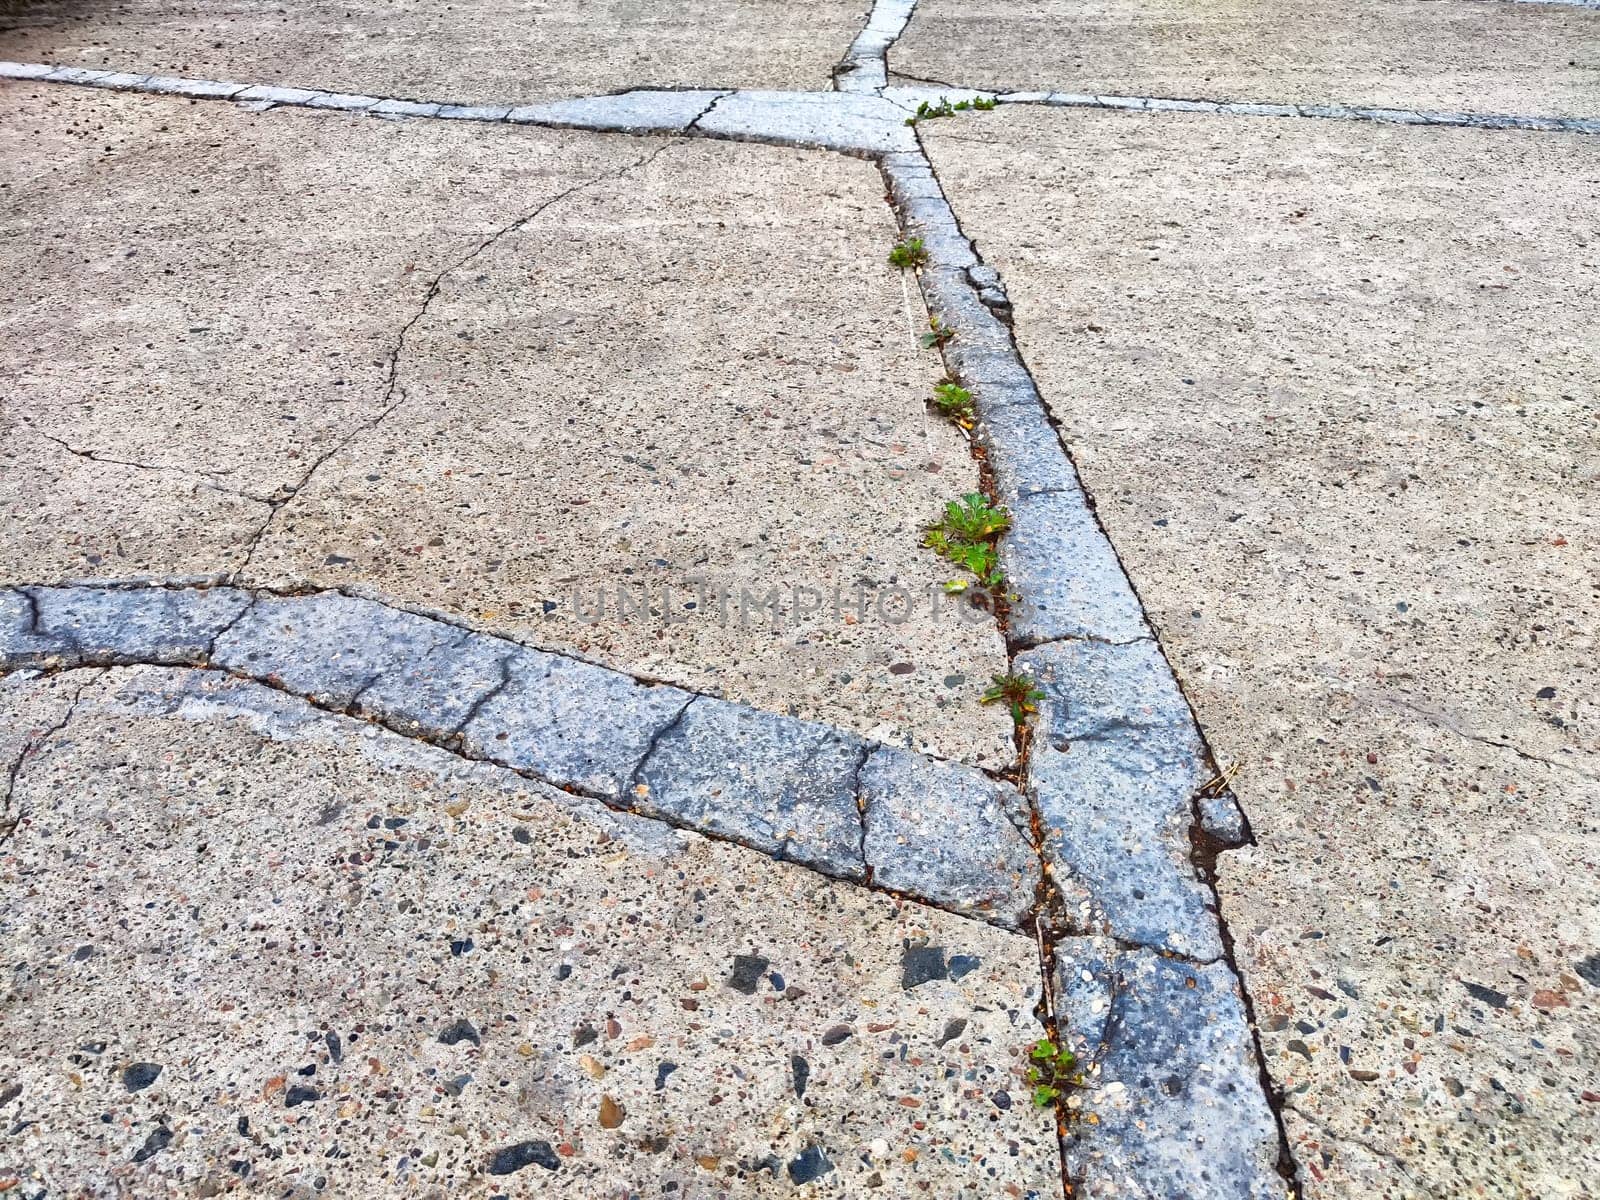 Background, texture of concrete slab on a sidewalk or road. Cracked Concrete Sidewalk With Emerging Plant Life